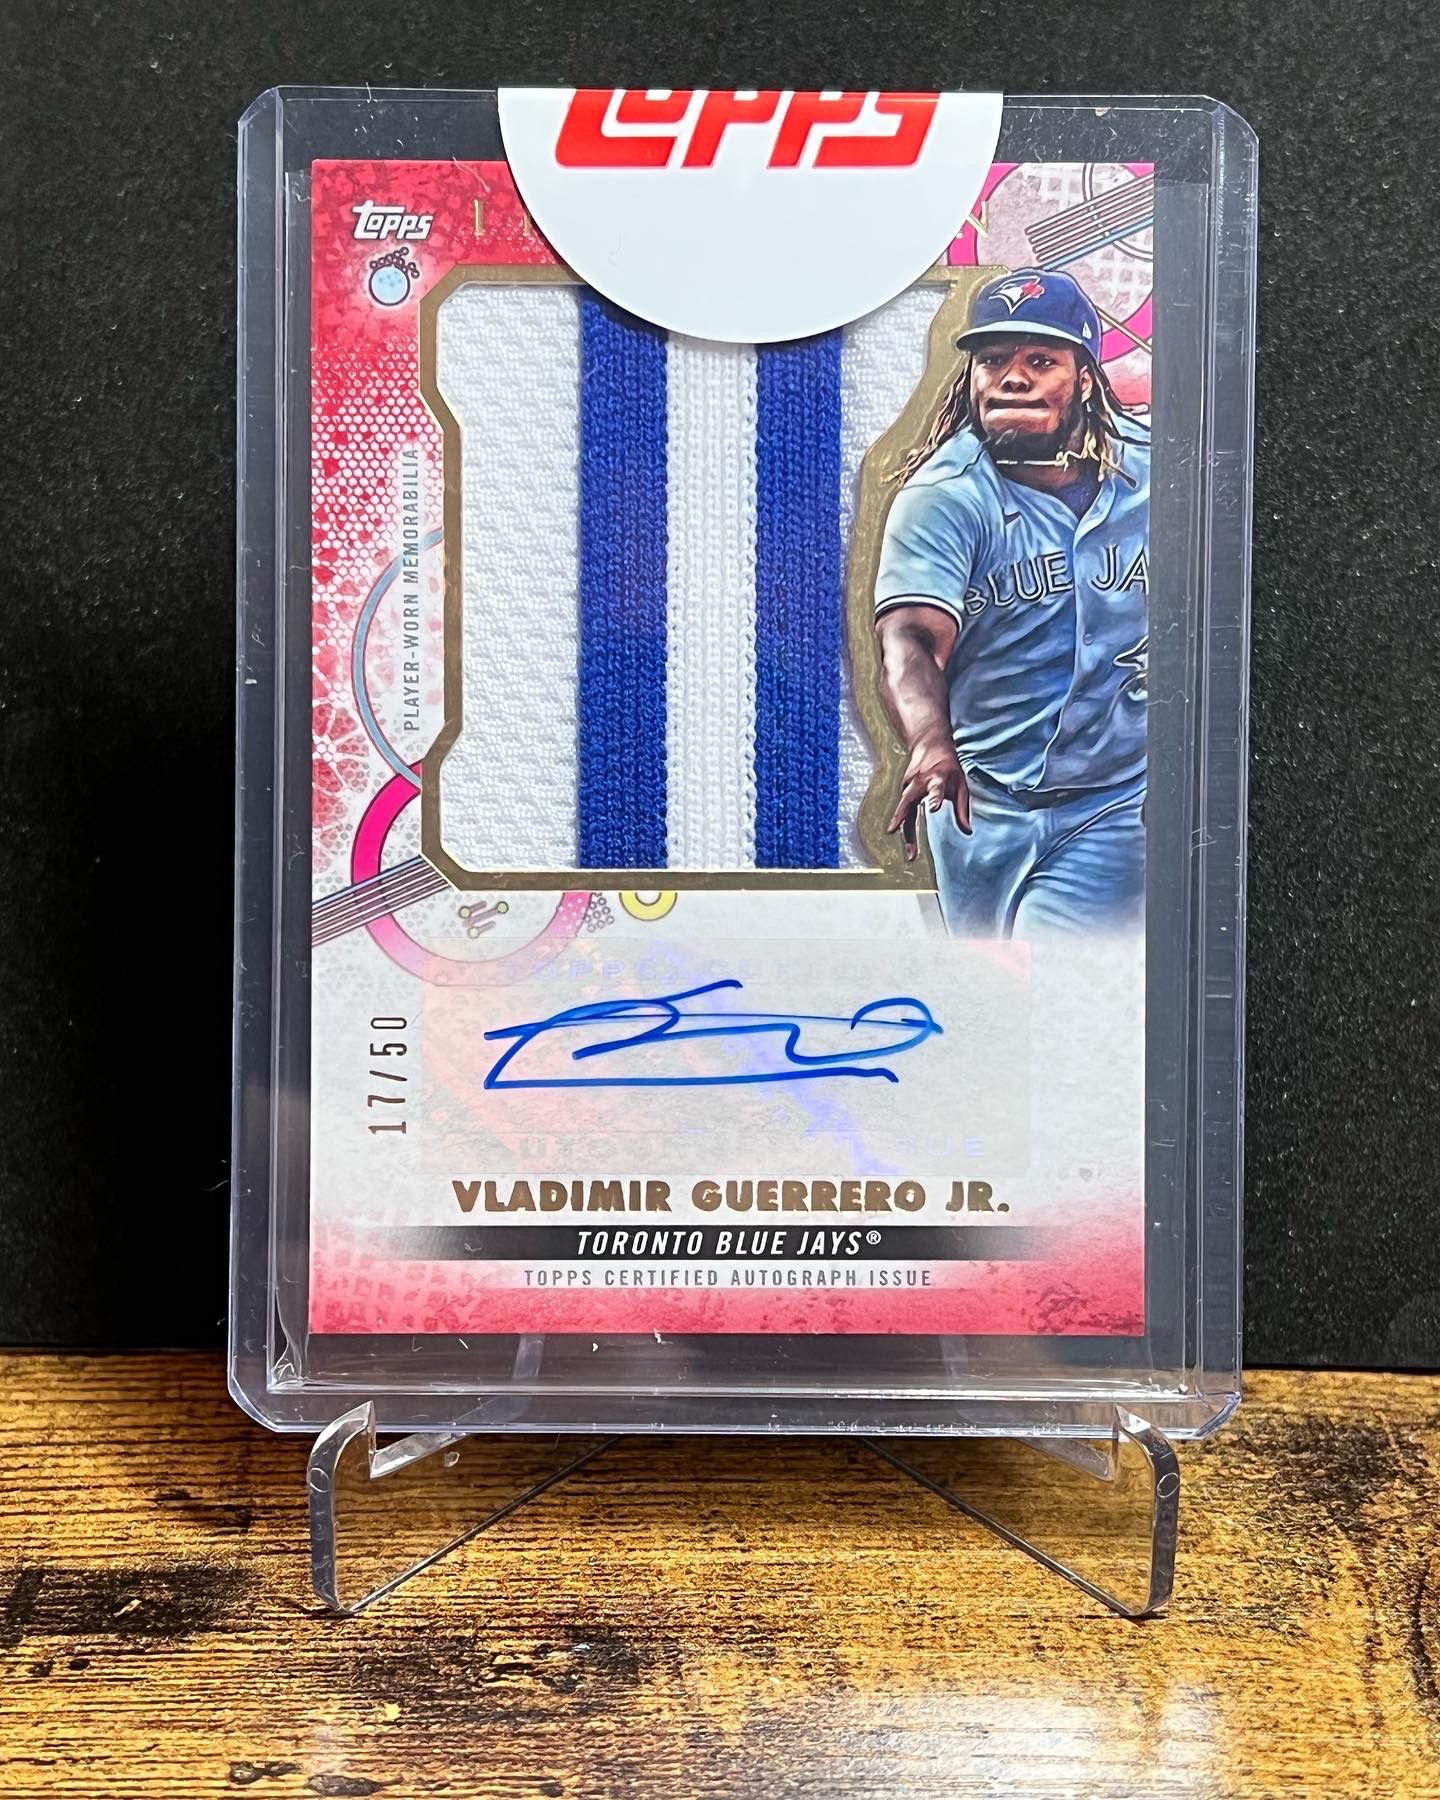 2022 Topps Inception Vladimir Guerrero Jr Jumbo Patch Auto Red for Sale in  Jersey City, NJ - OfferUp